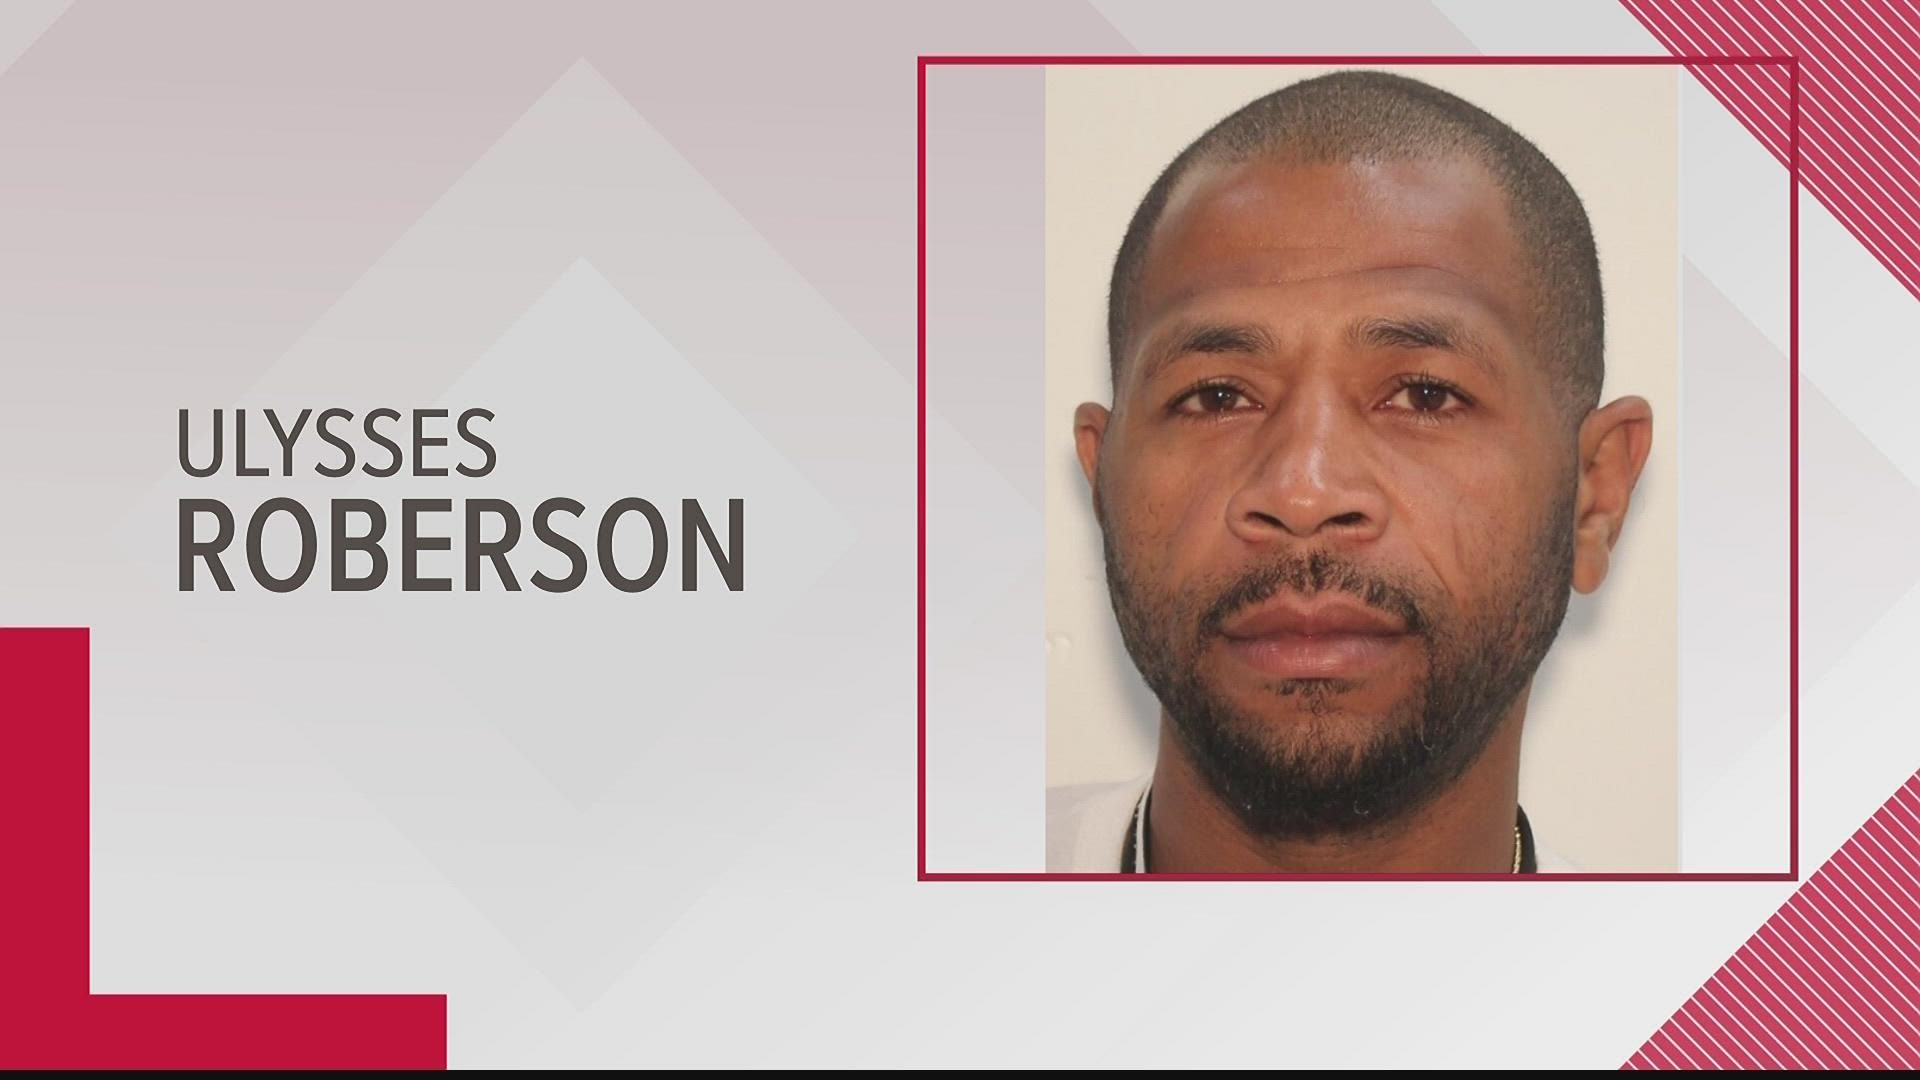 According to police, Roberson is facing a narcotics charge as well as felony escape.